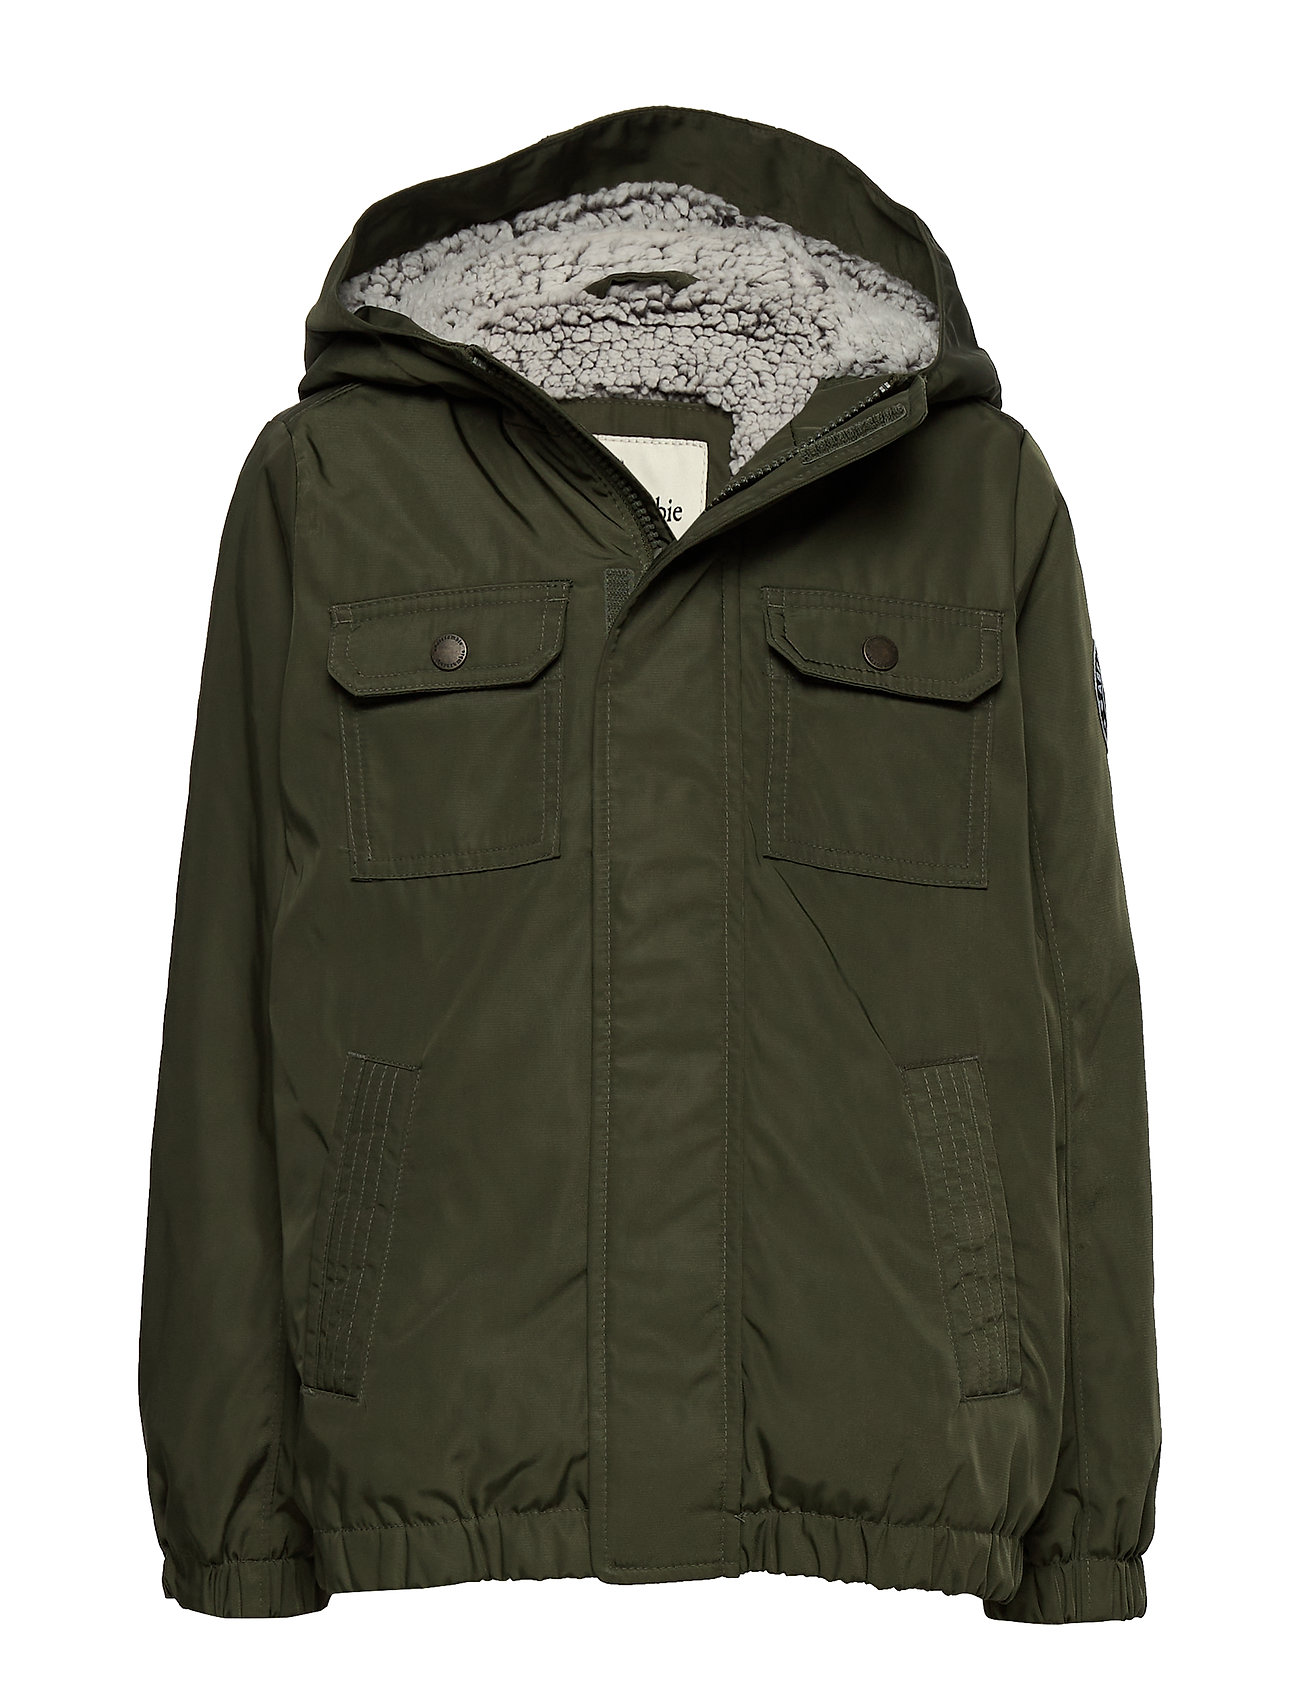 abercrombie and fitch green jacket